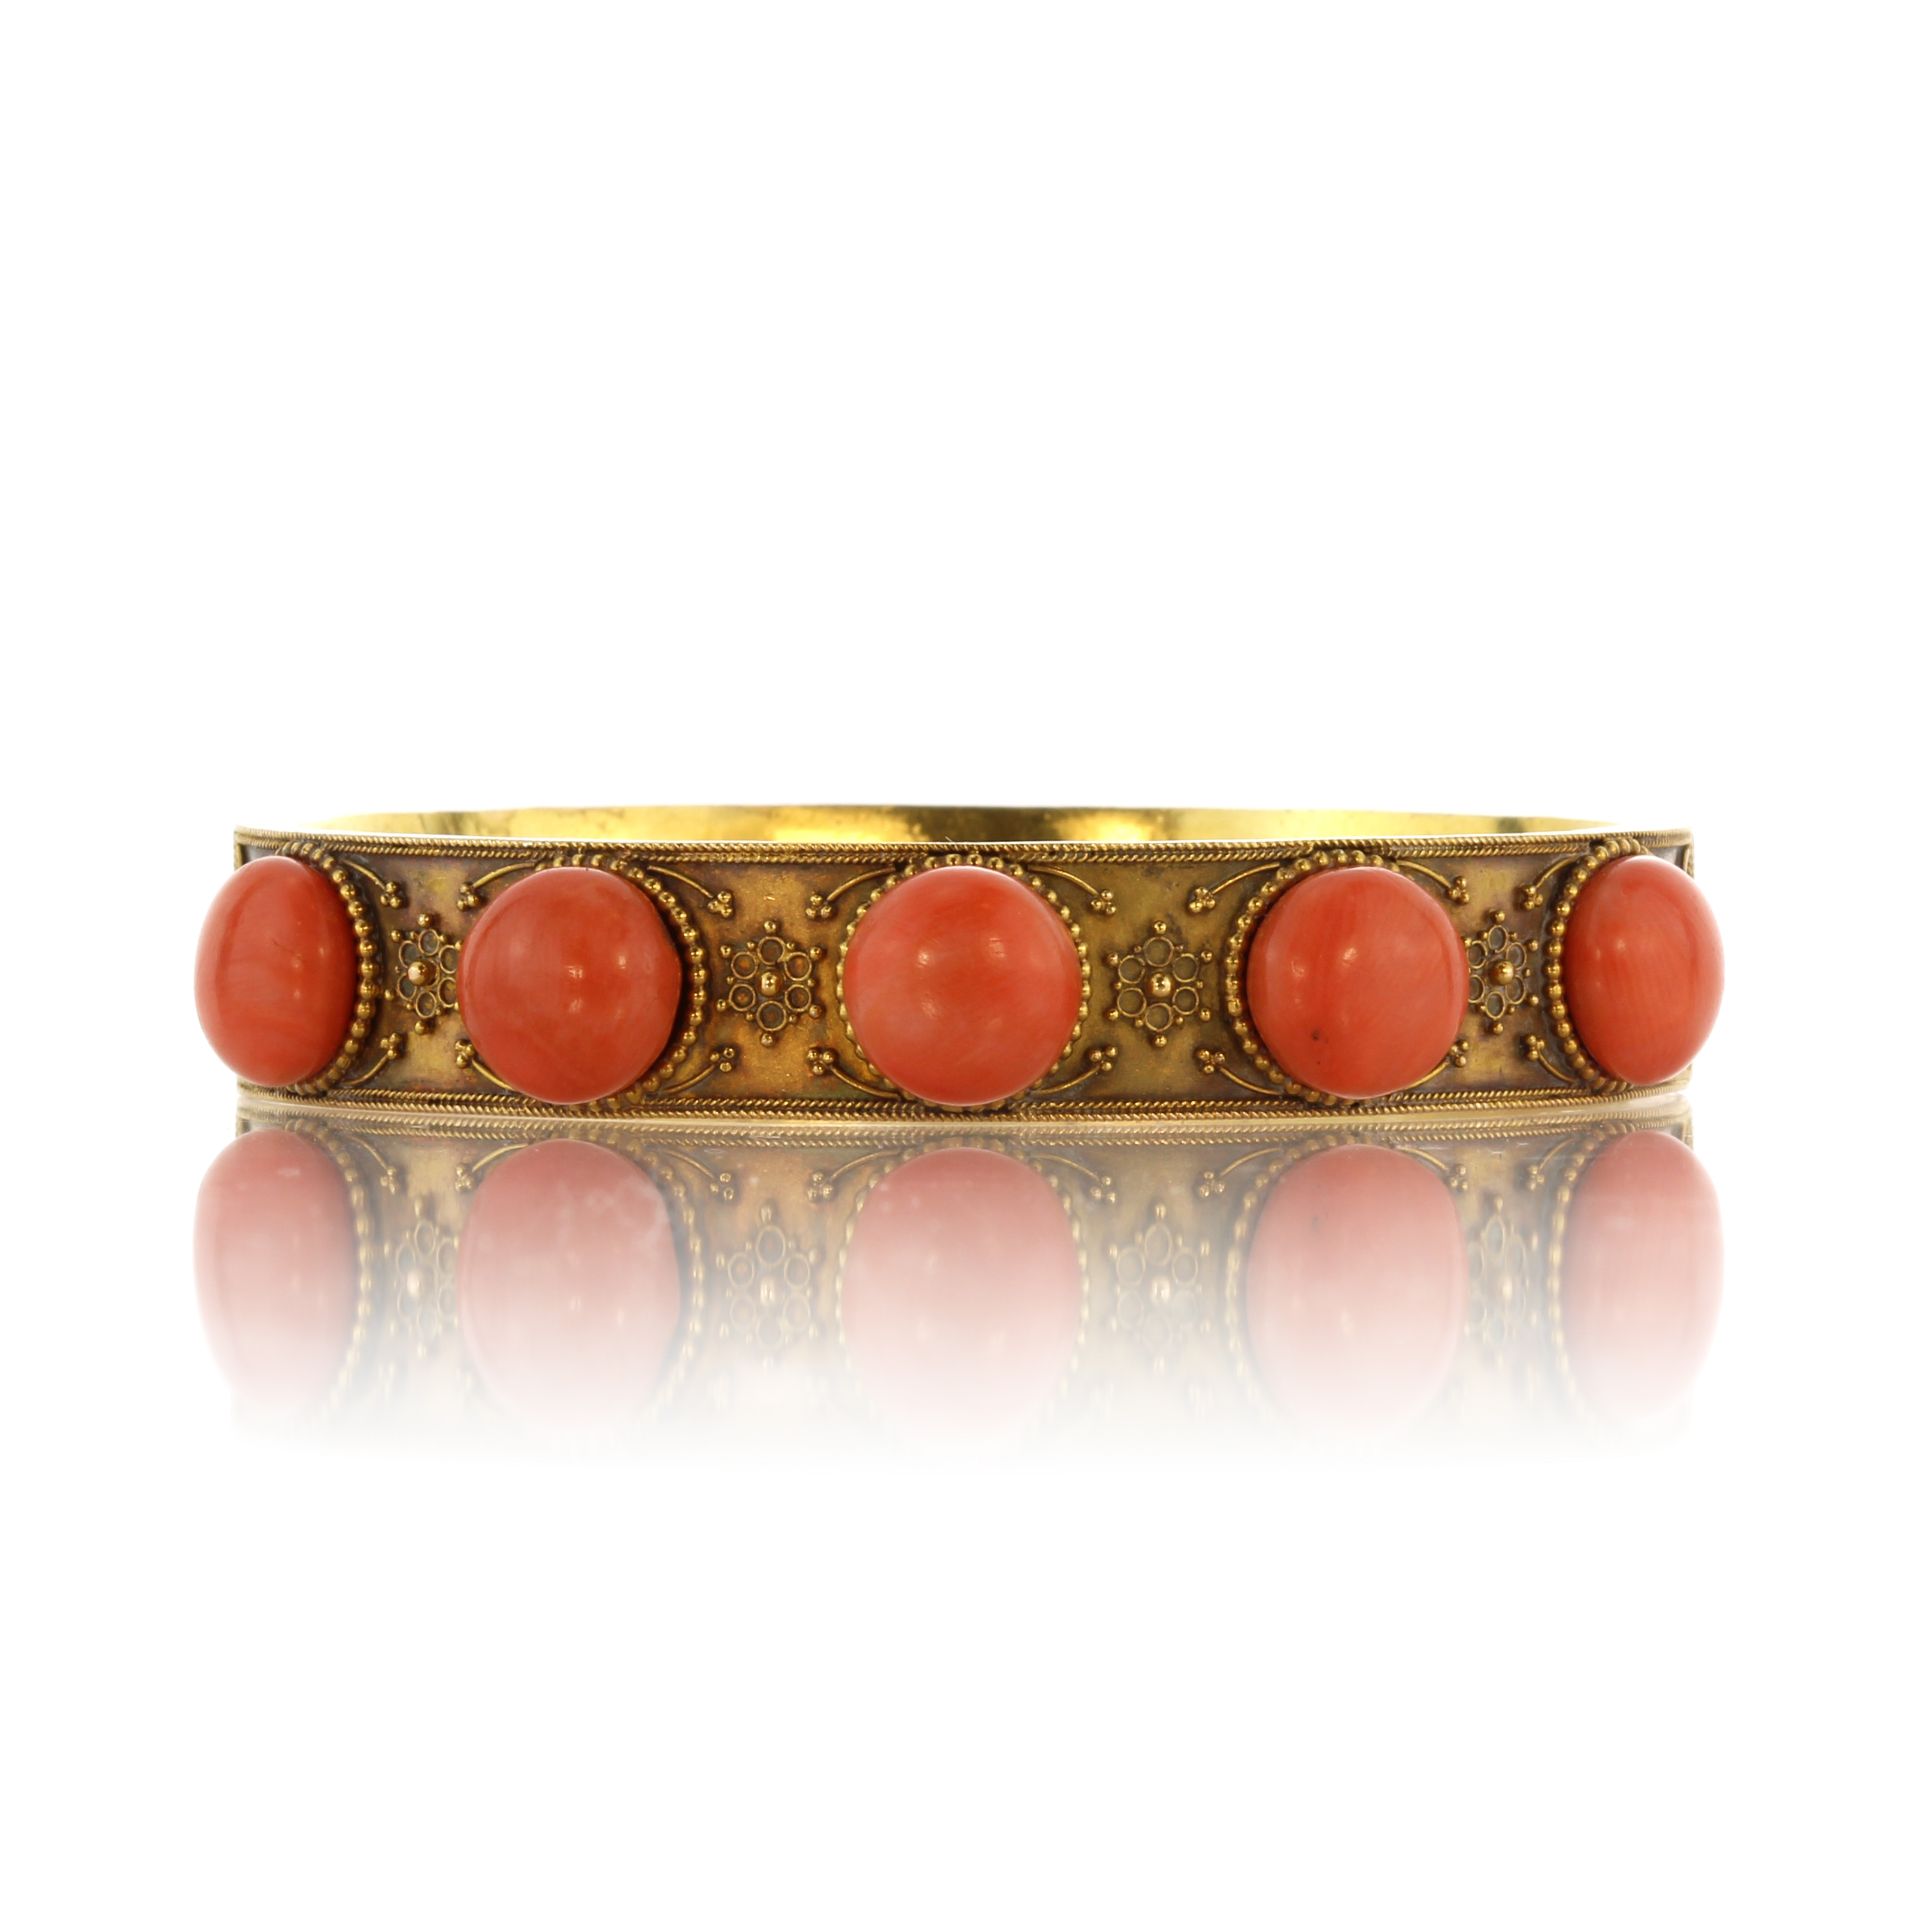 An antique coral bangle in 15ct yellow gold circa 1875, designed as a plain band set with five large